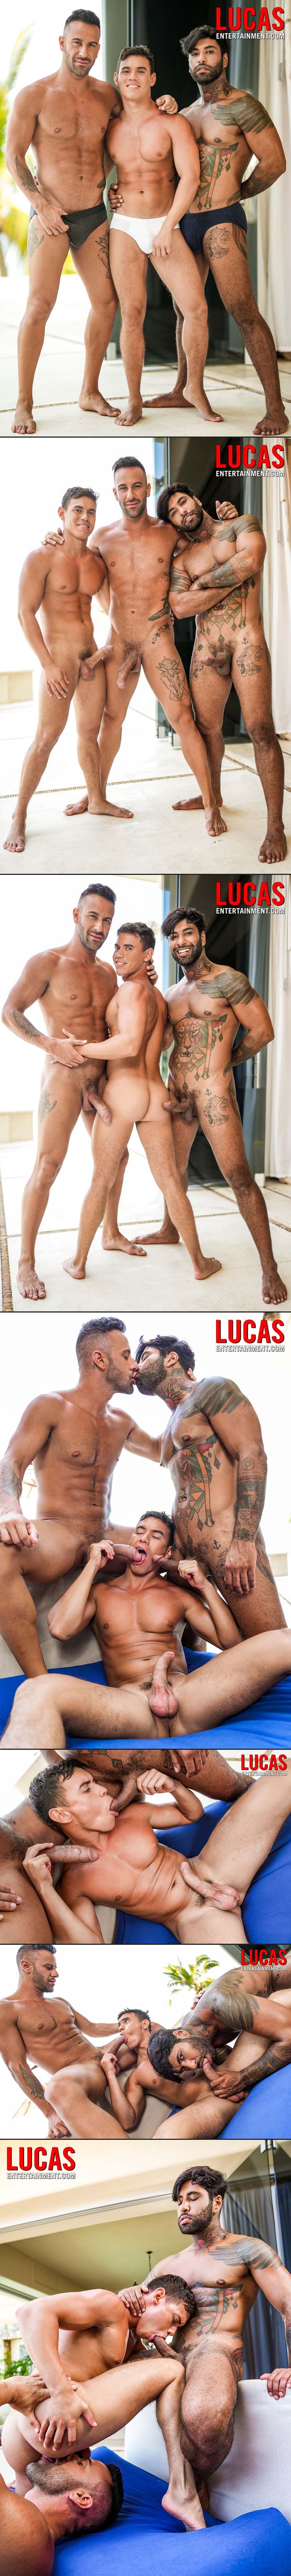 Swapping Some Semen, Scene 1 (Gustavo Cruz And Babylon Prince Double Team Oliver Hunt) at LucasEntertainment